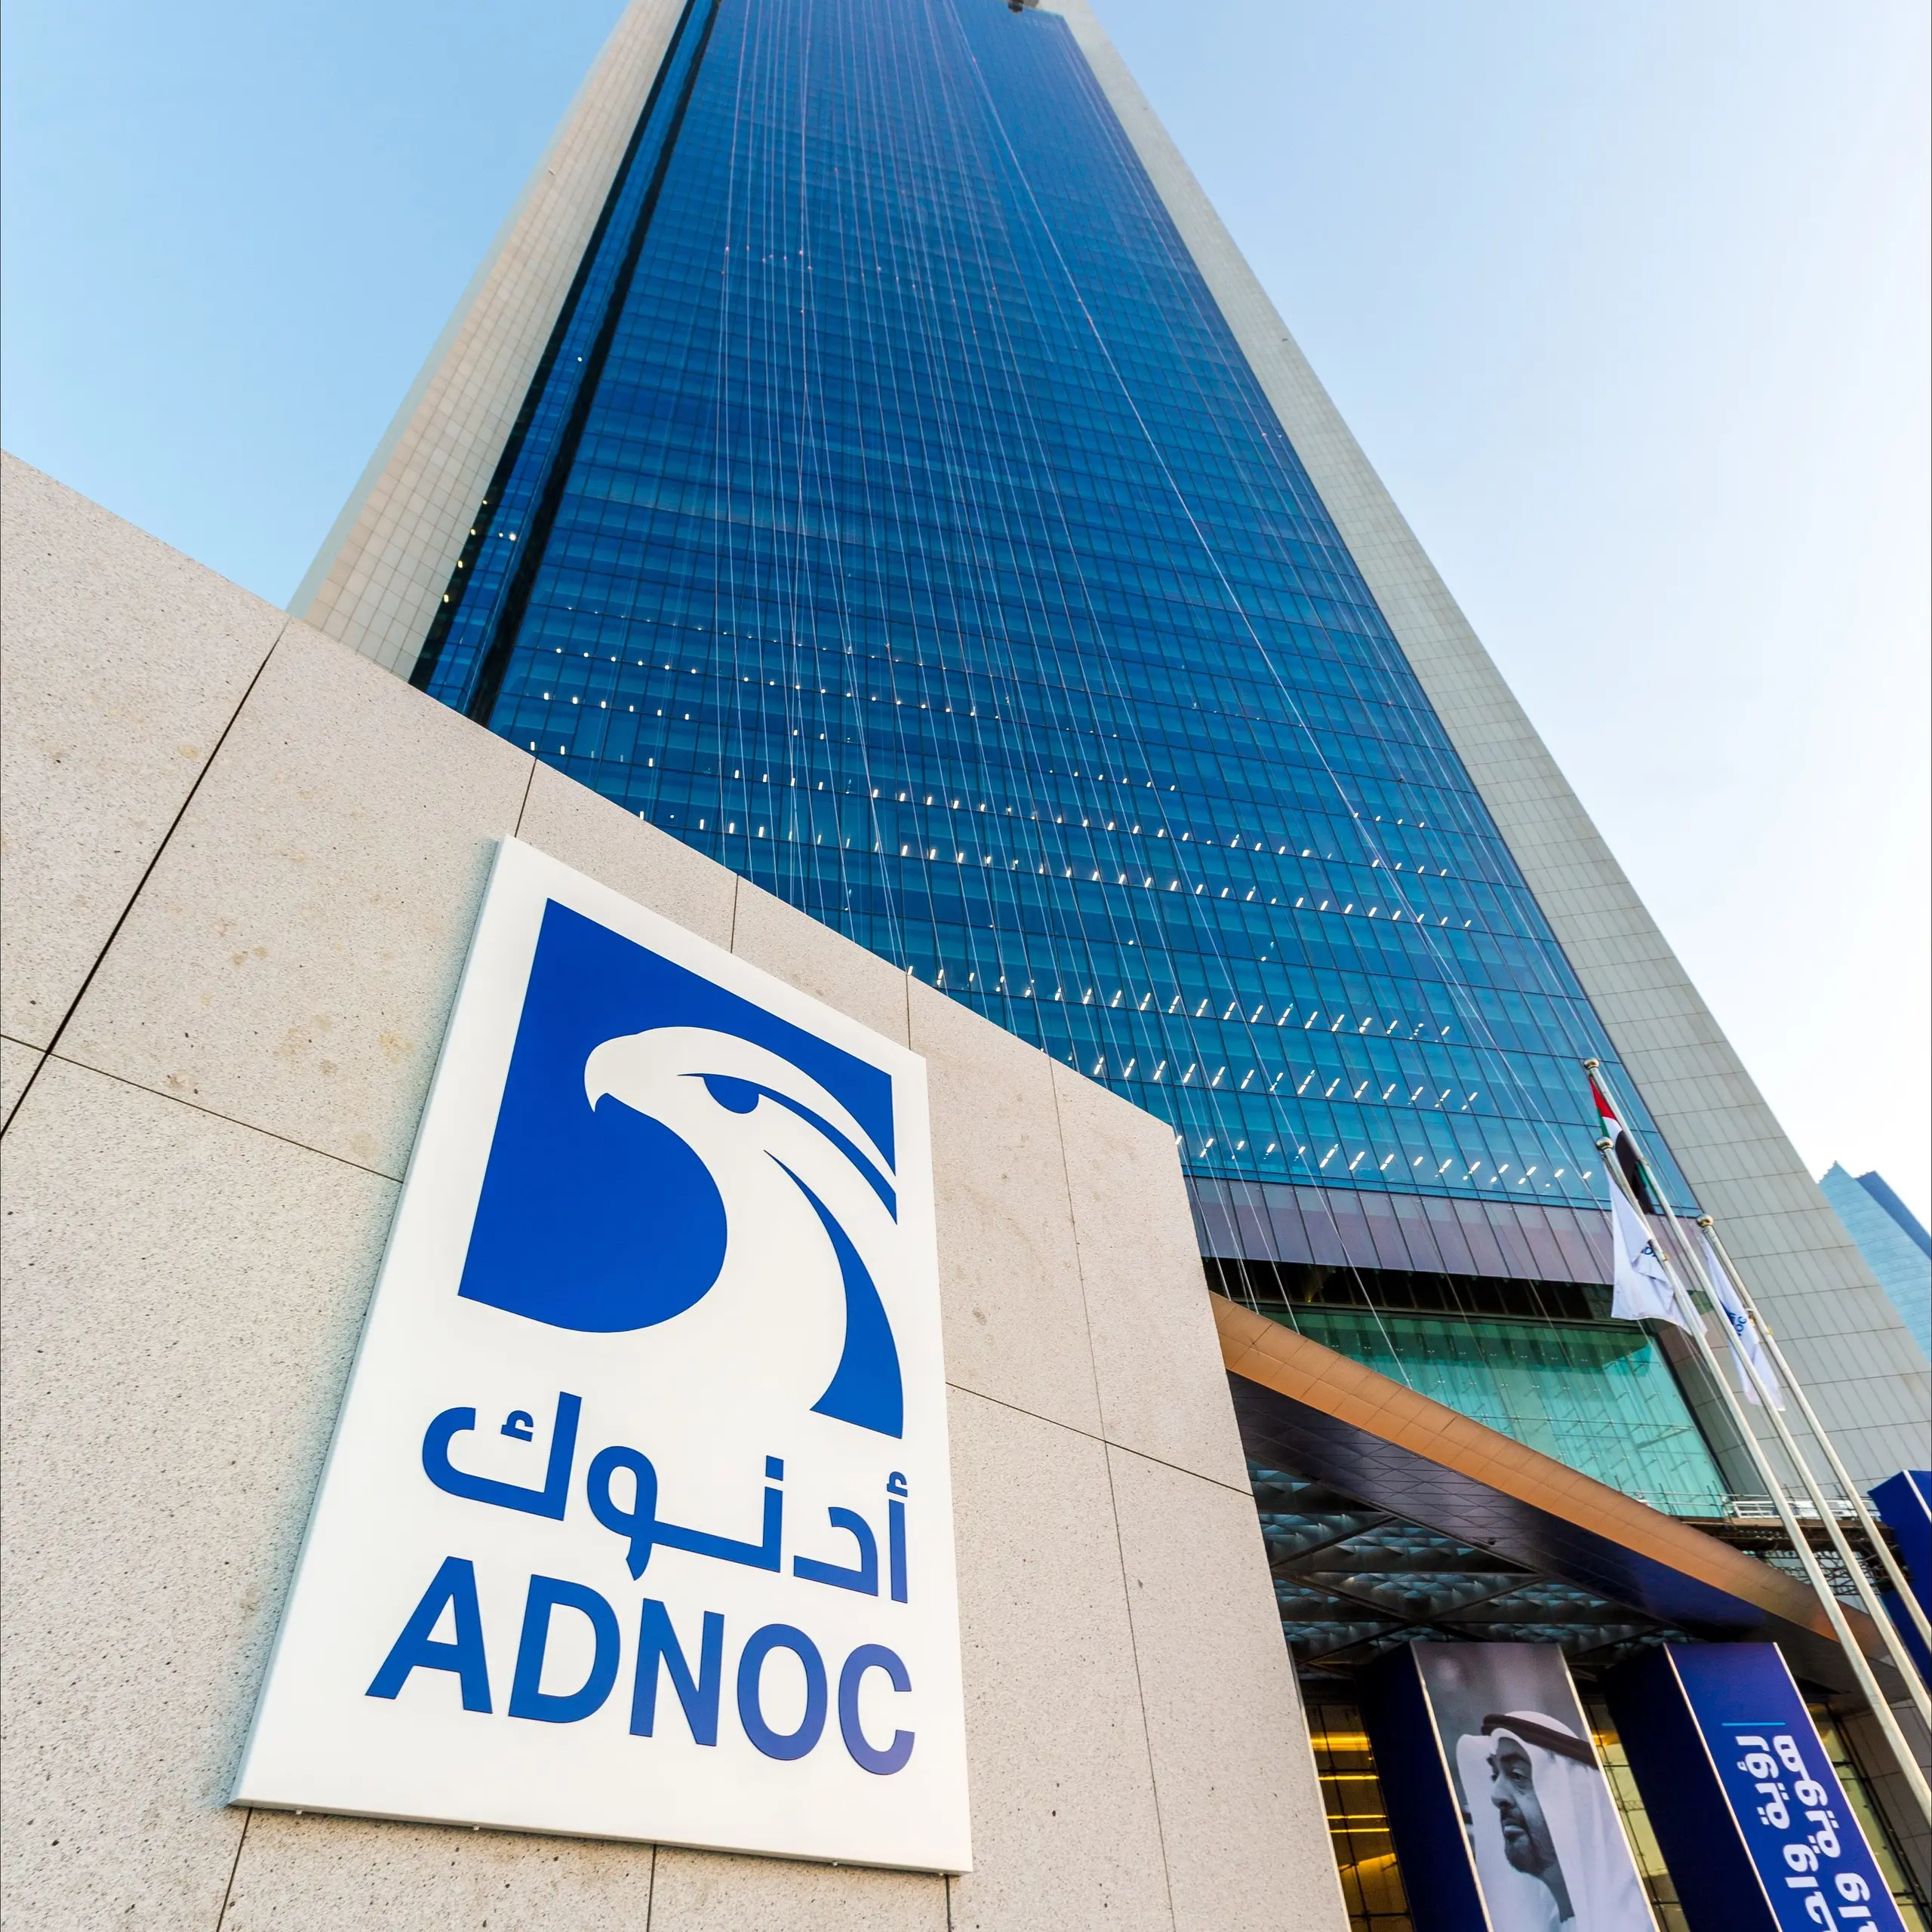 eBlue_economy_ADNOC Expands Strategic Partnerships Across the Hydrogen Value Chain with Leading German Companies